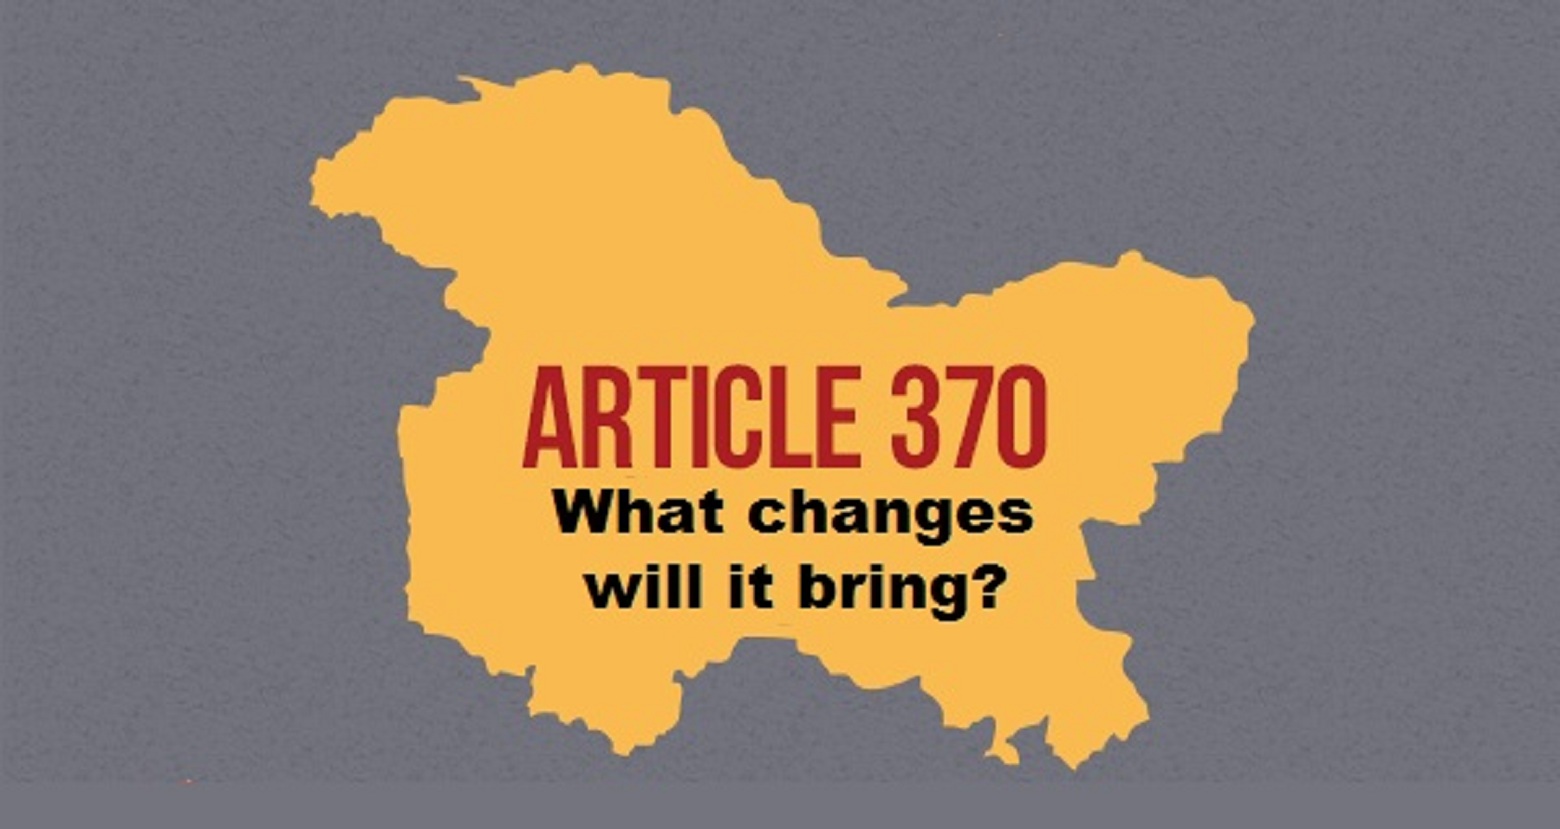 Article 370: What Does It Mean? And What Changes in J&K Now? Details Here.